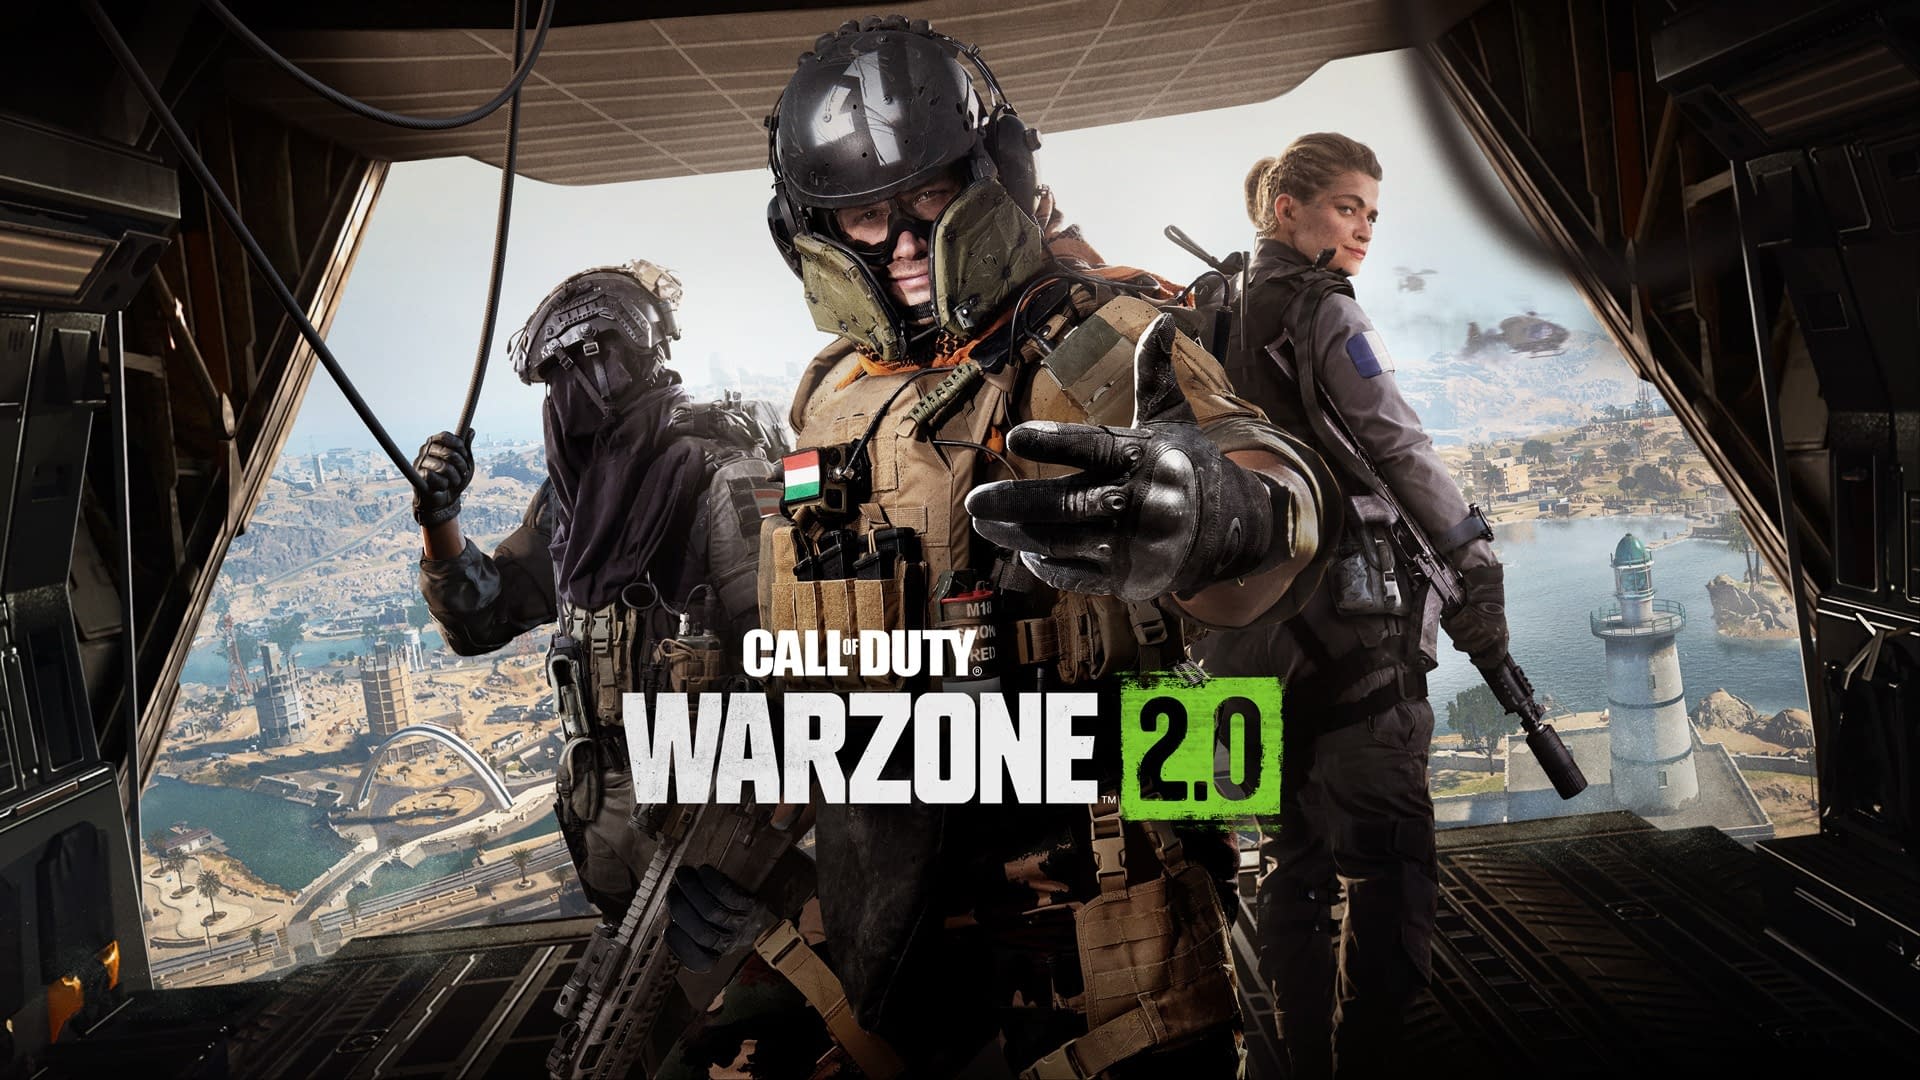 Call of Duty: Warzone 2.0 Reaches 25 Million Players in Five Days